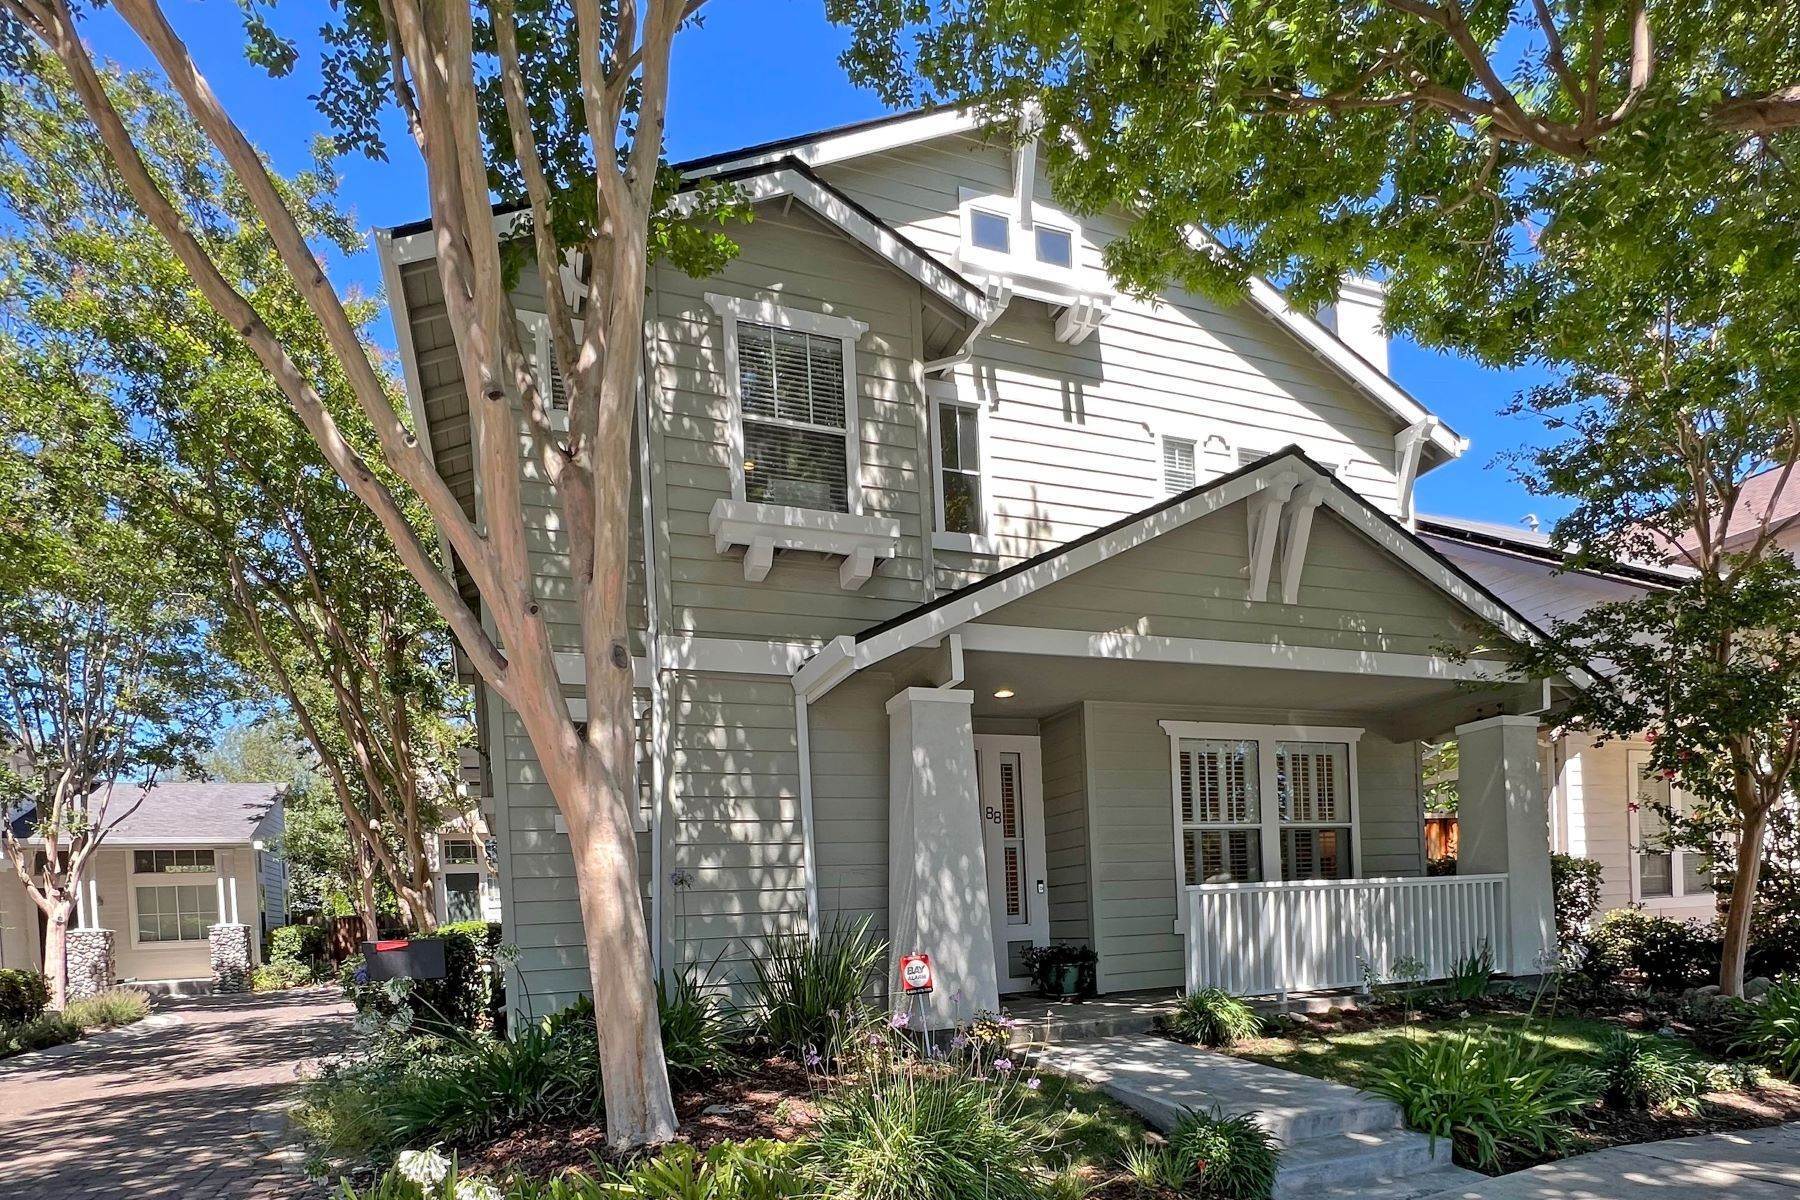 Single Family Homes for Sale at Stunning Remodeled Naglee Park Craftsman 88 South 16th Street San Jose, California 95112 United States